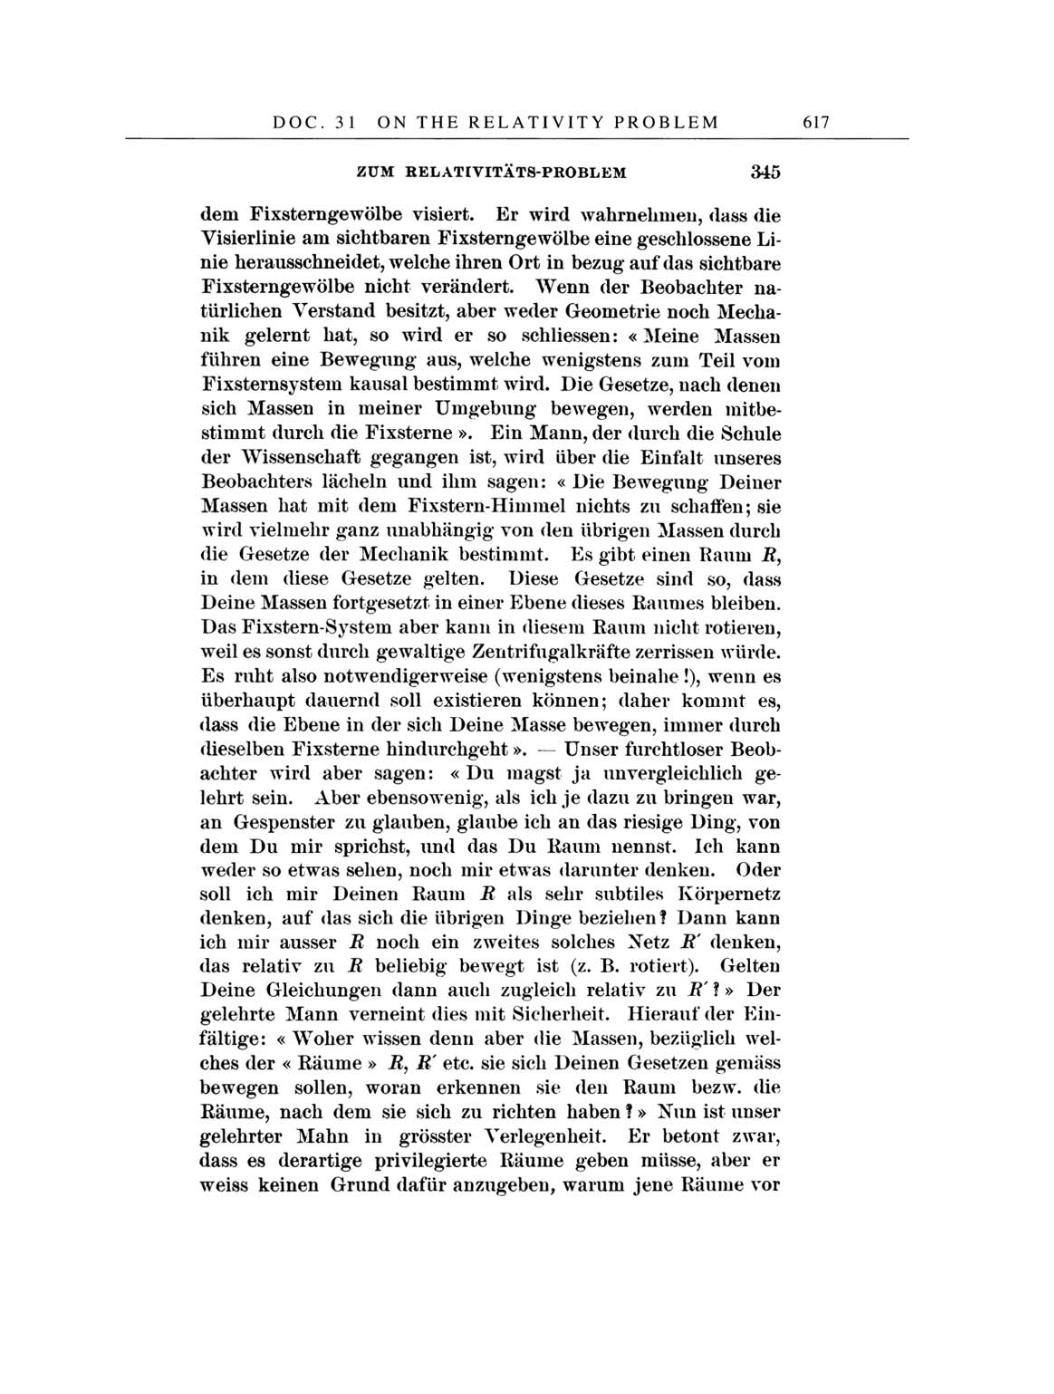 Volume 4: The Swiss Years: Writings 1912-1914 page 617